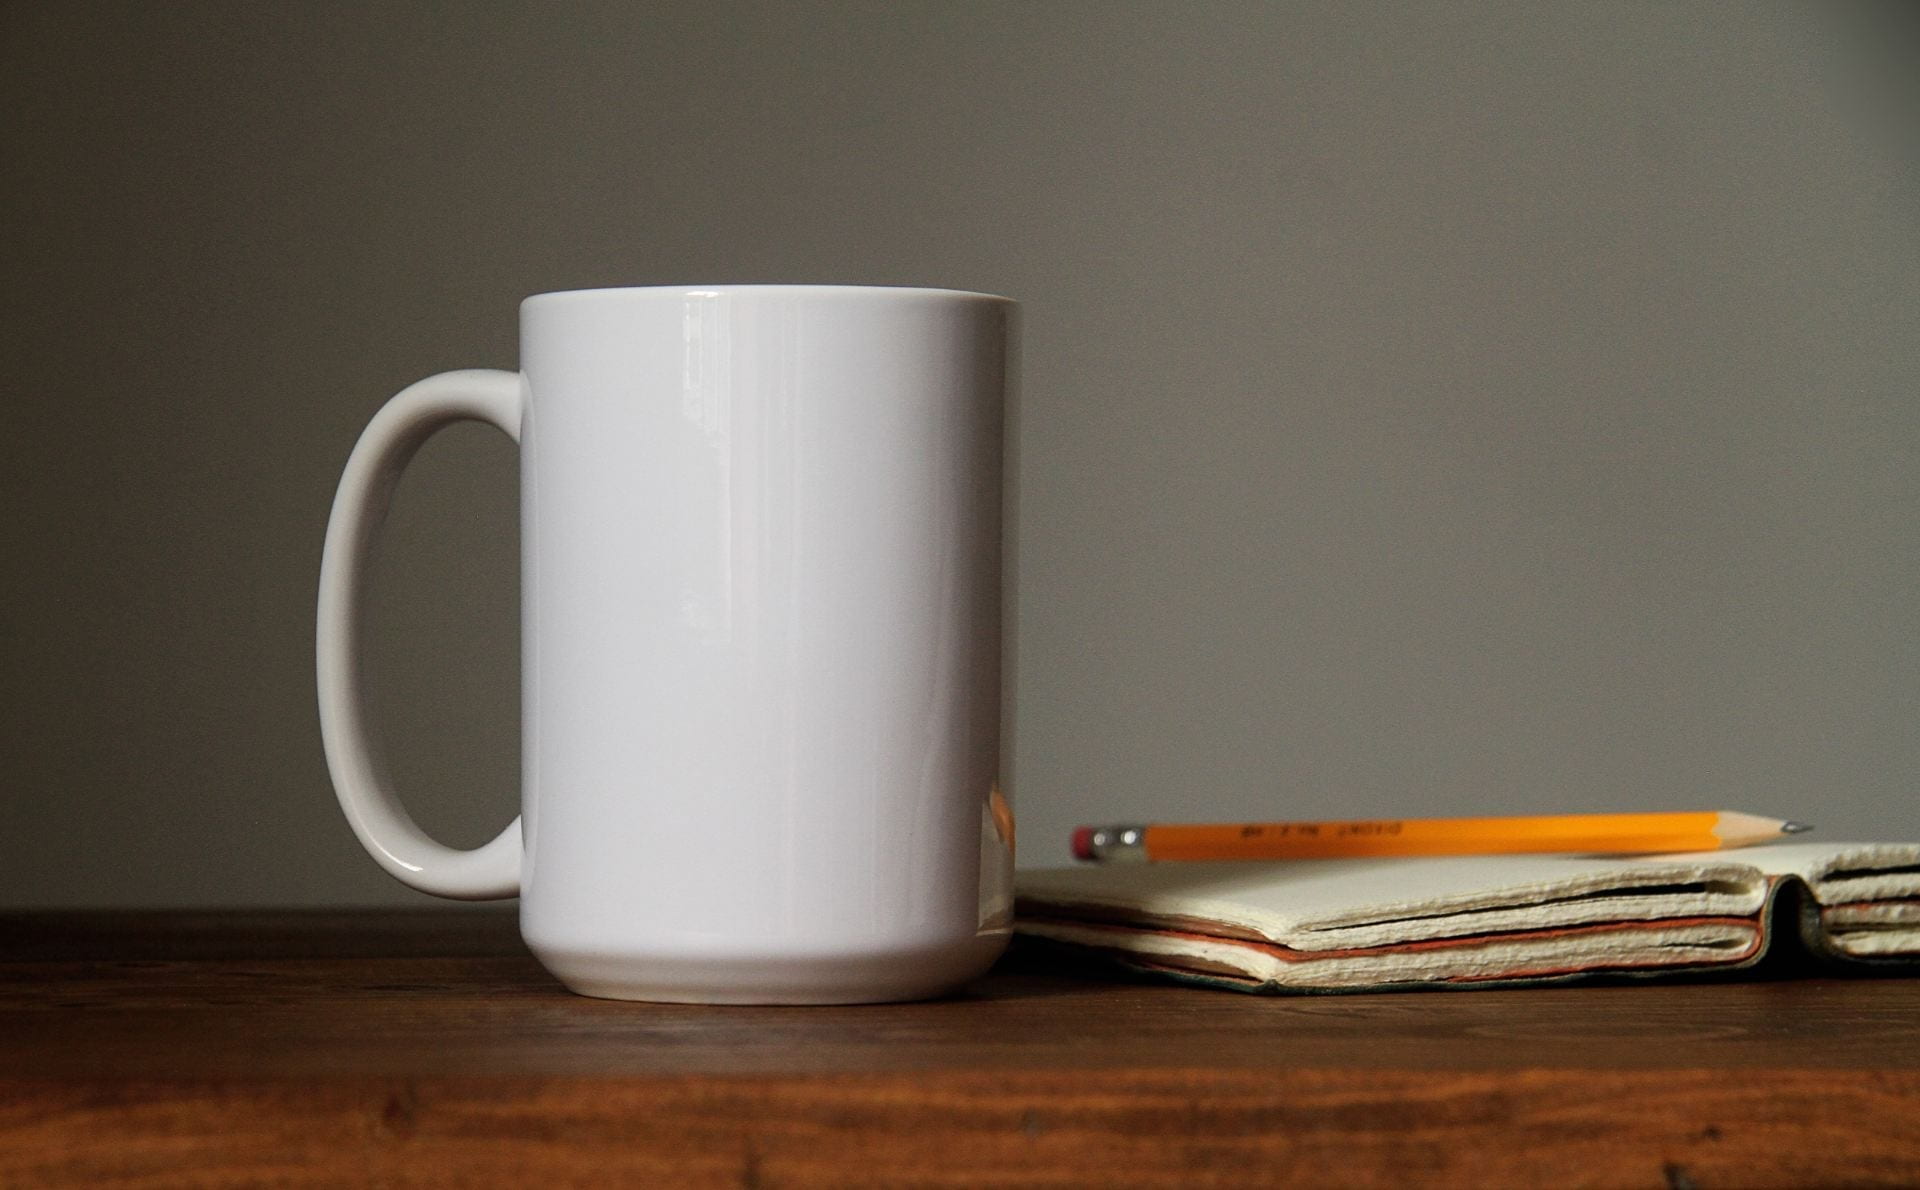 A mug on a table next to a notebook and pencil